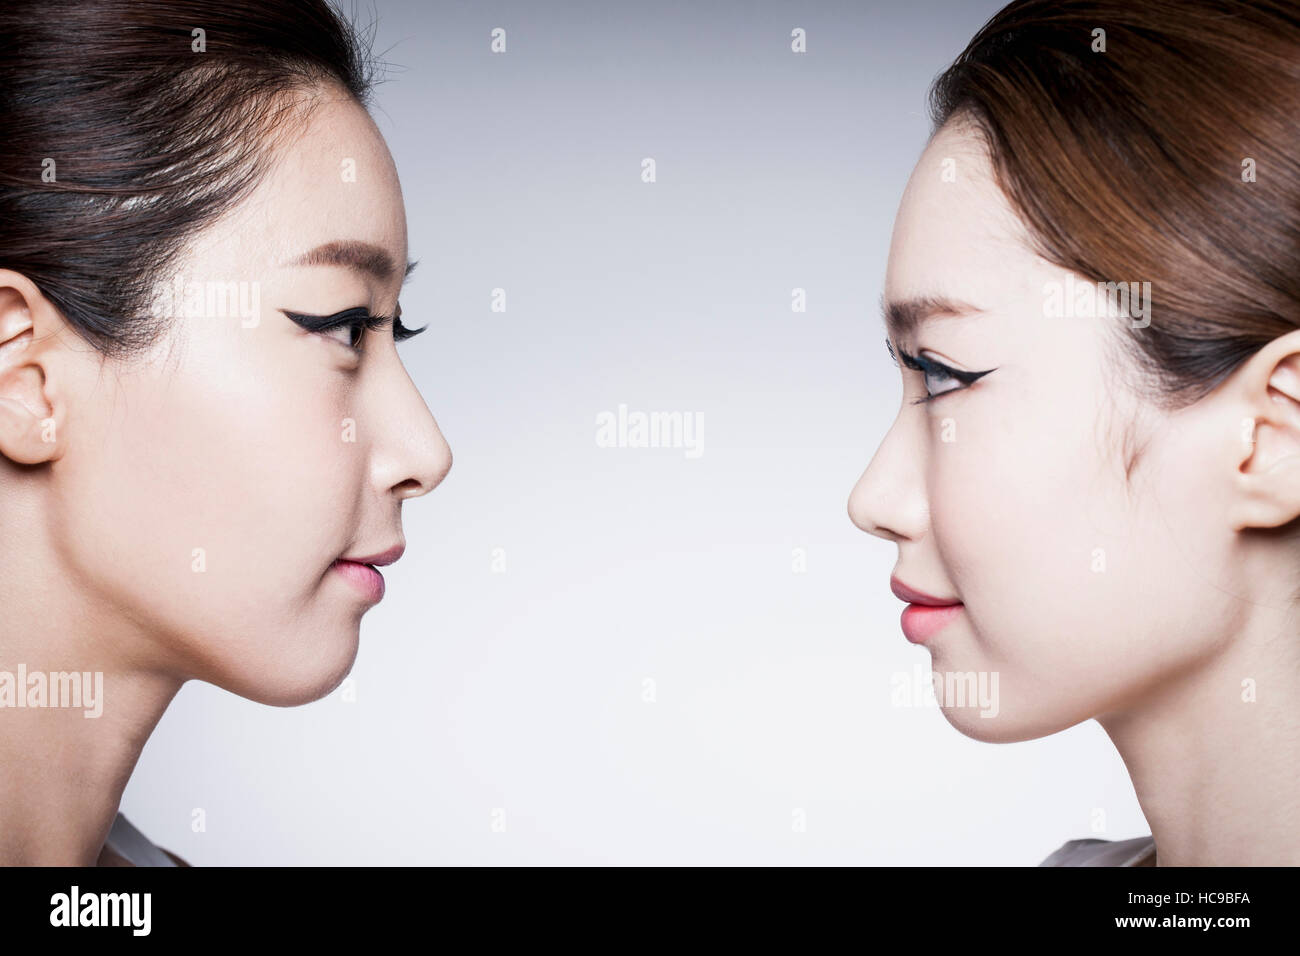 Side view of faces of two young Korean women Stock Photo